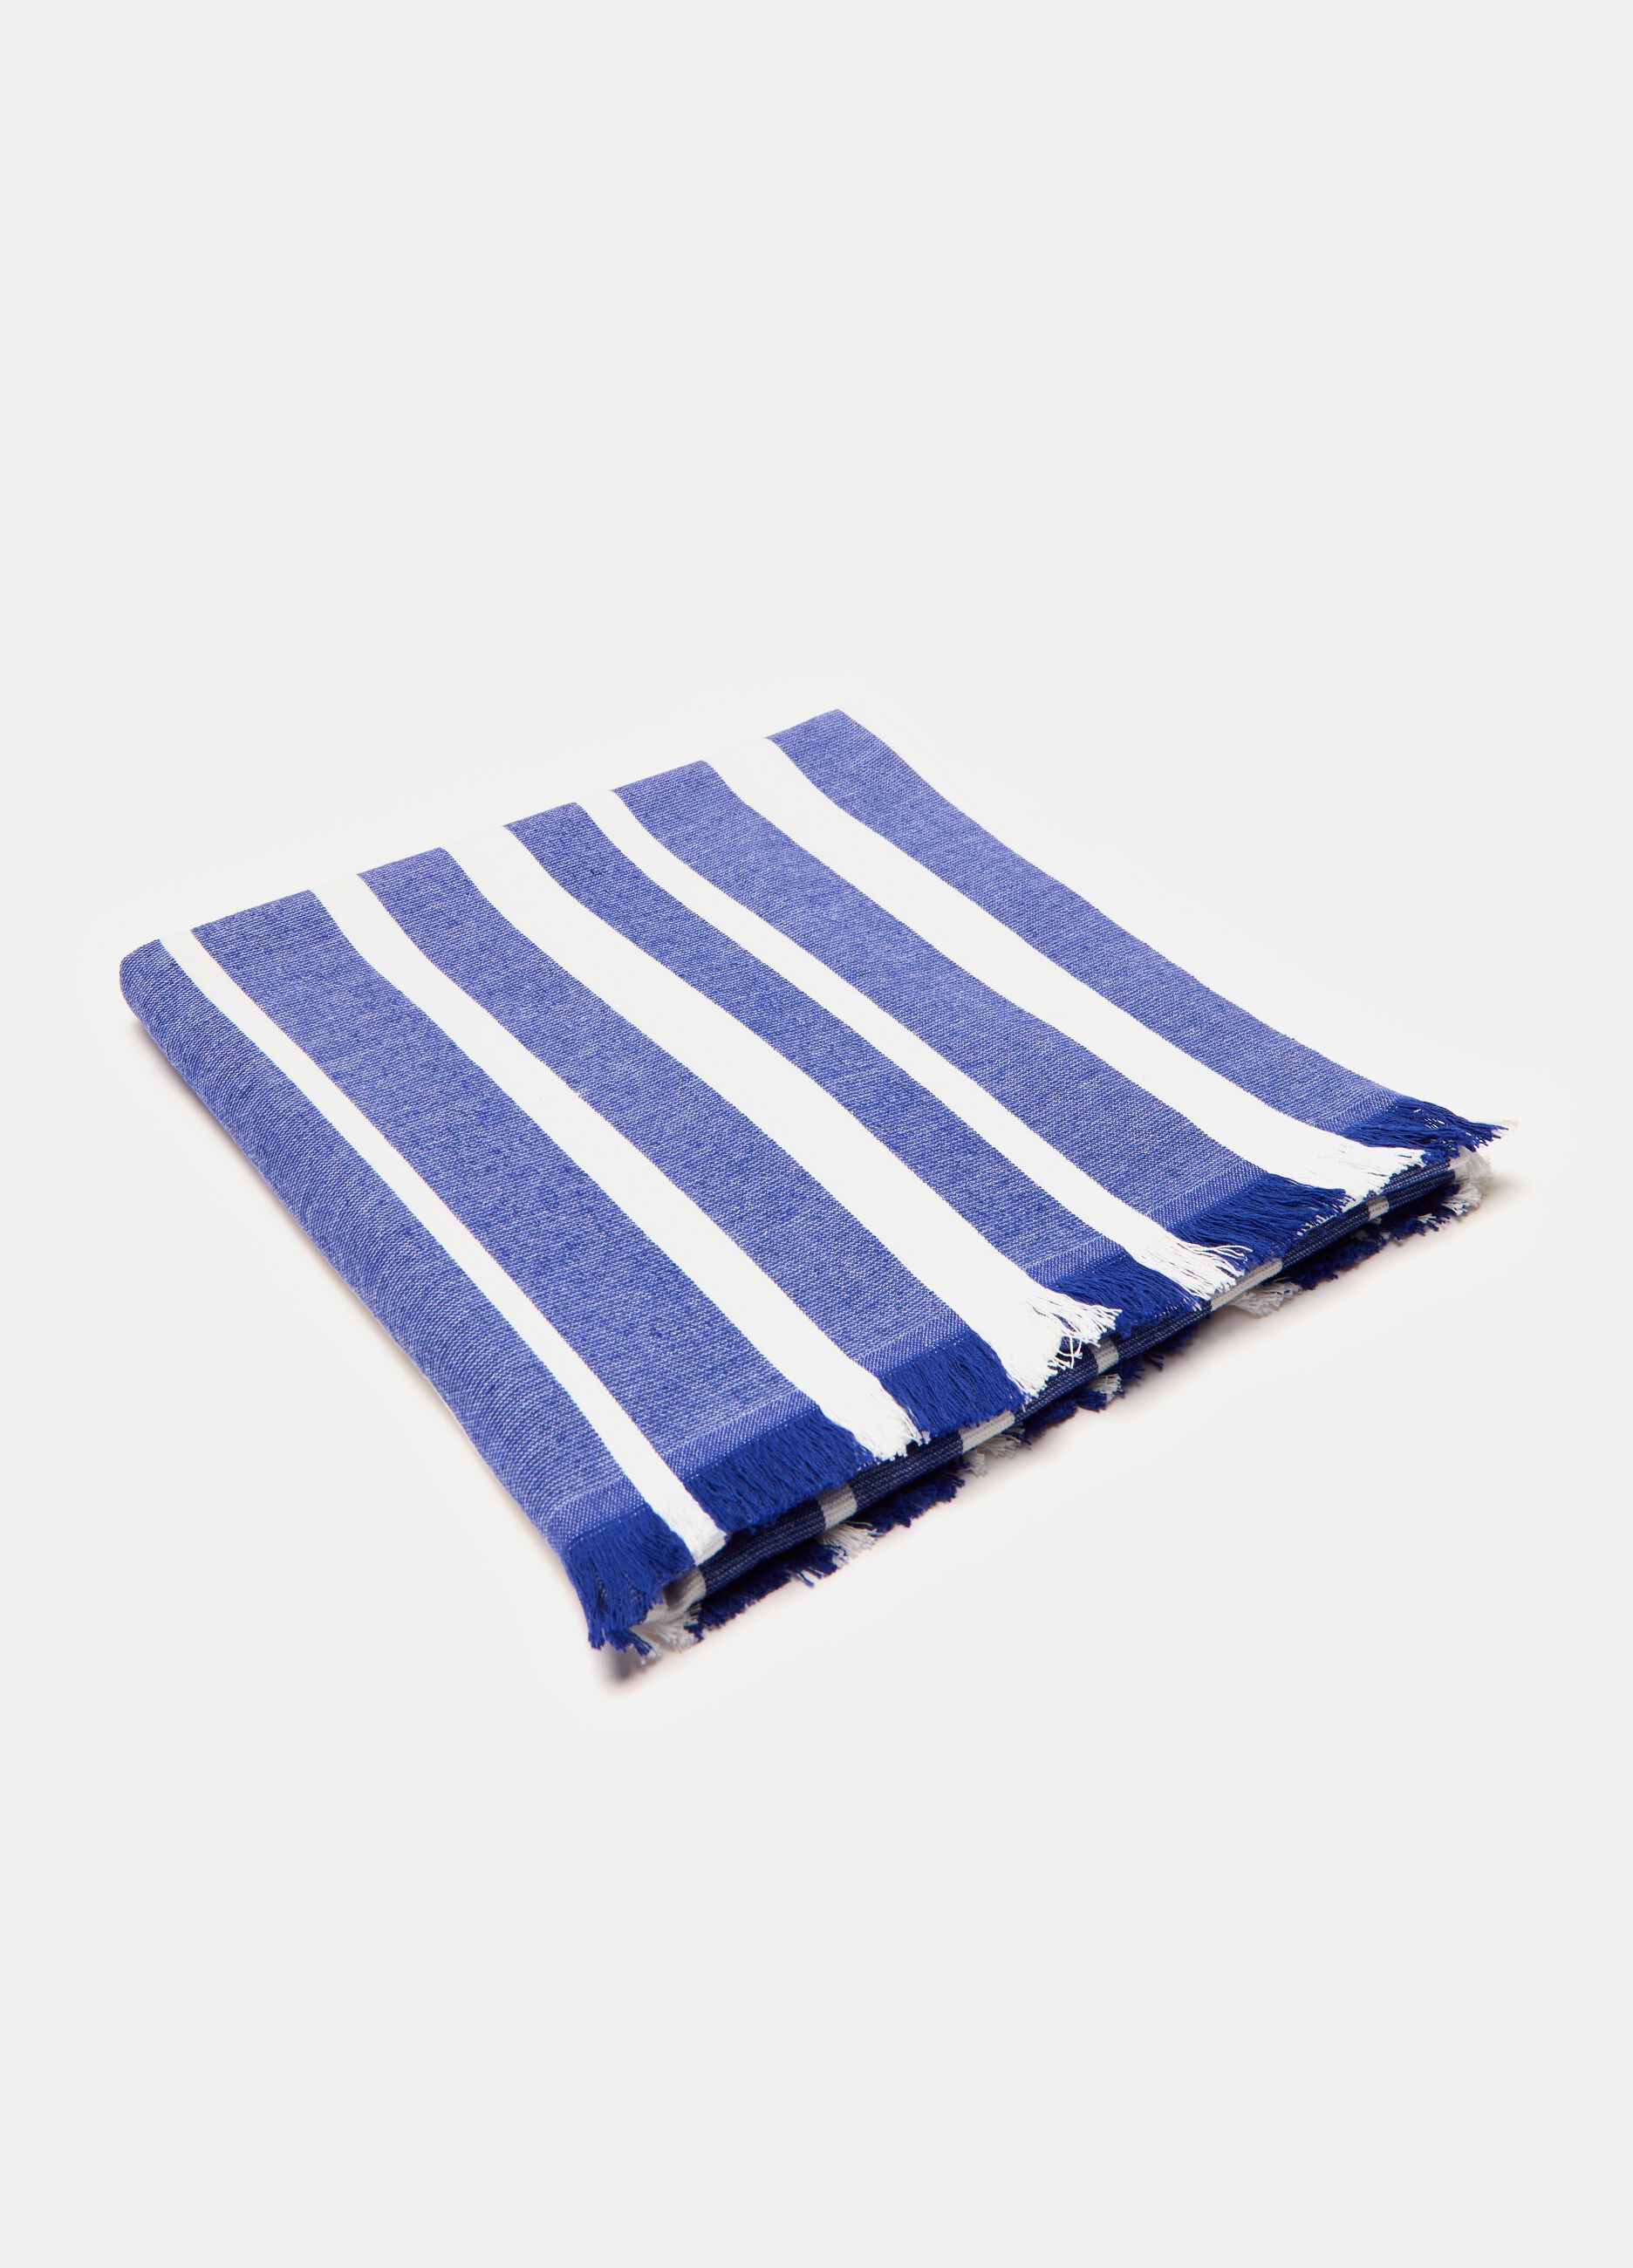 Beach towel with vertical stripes